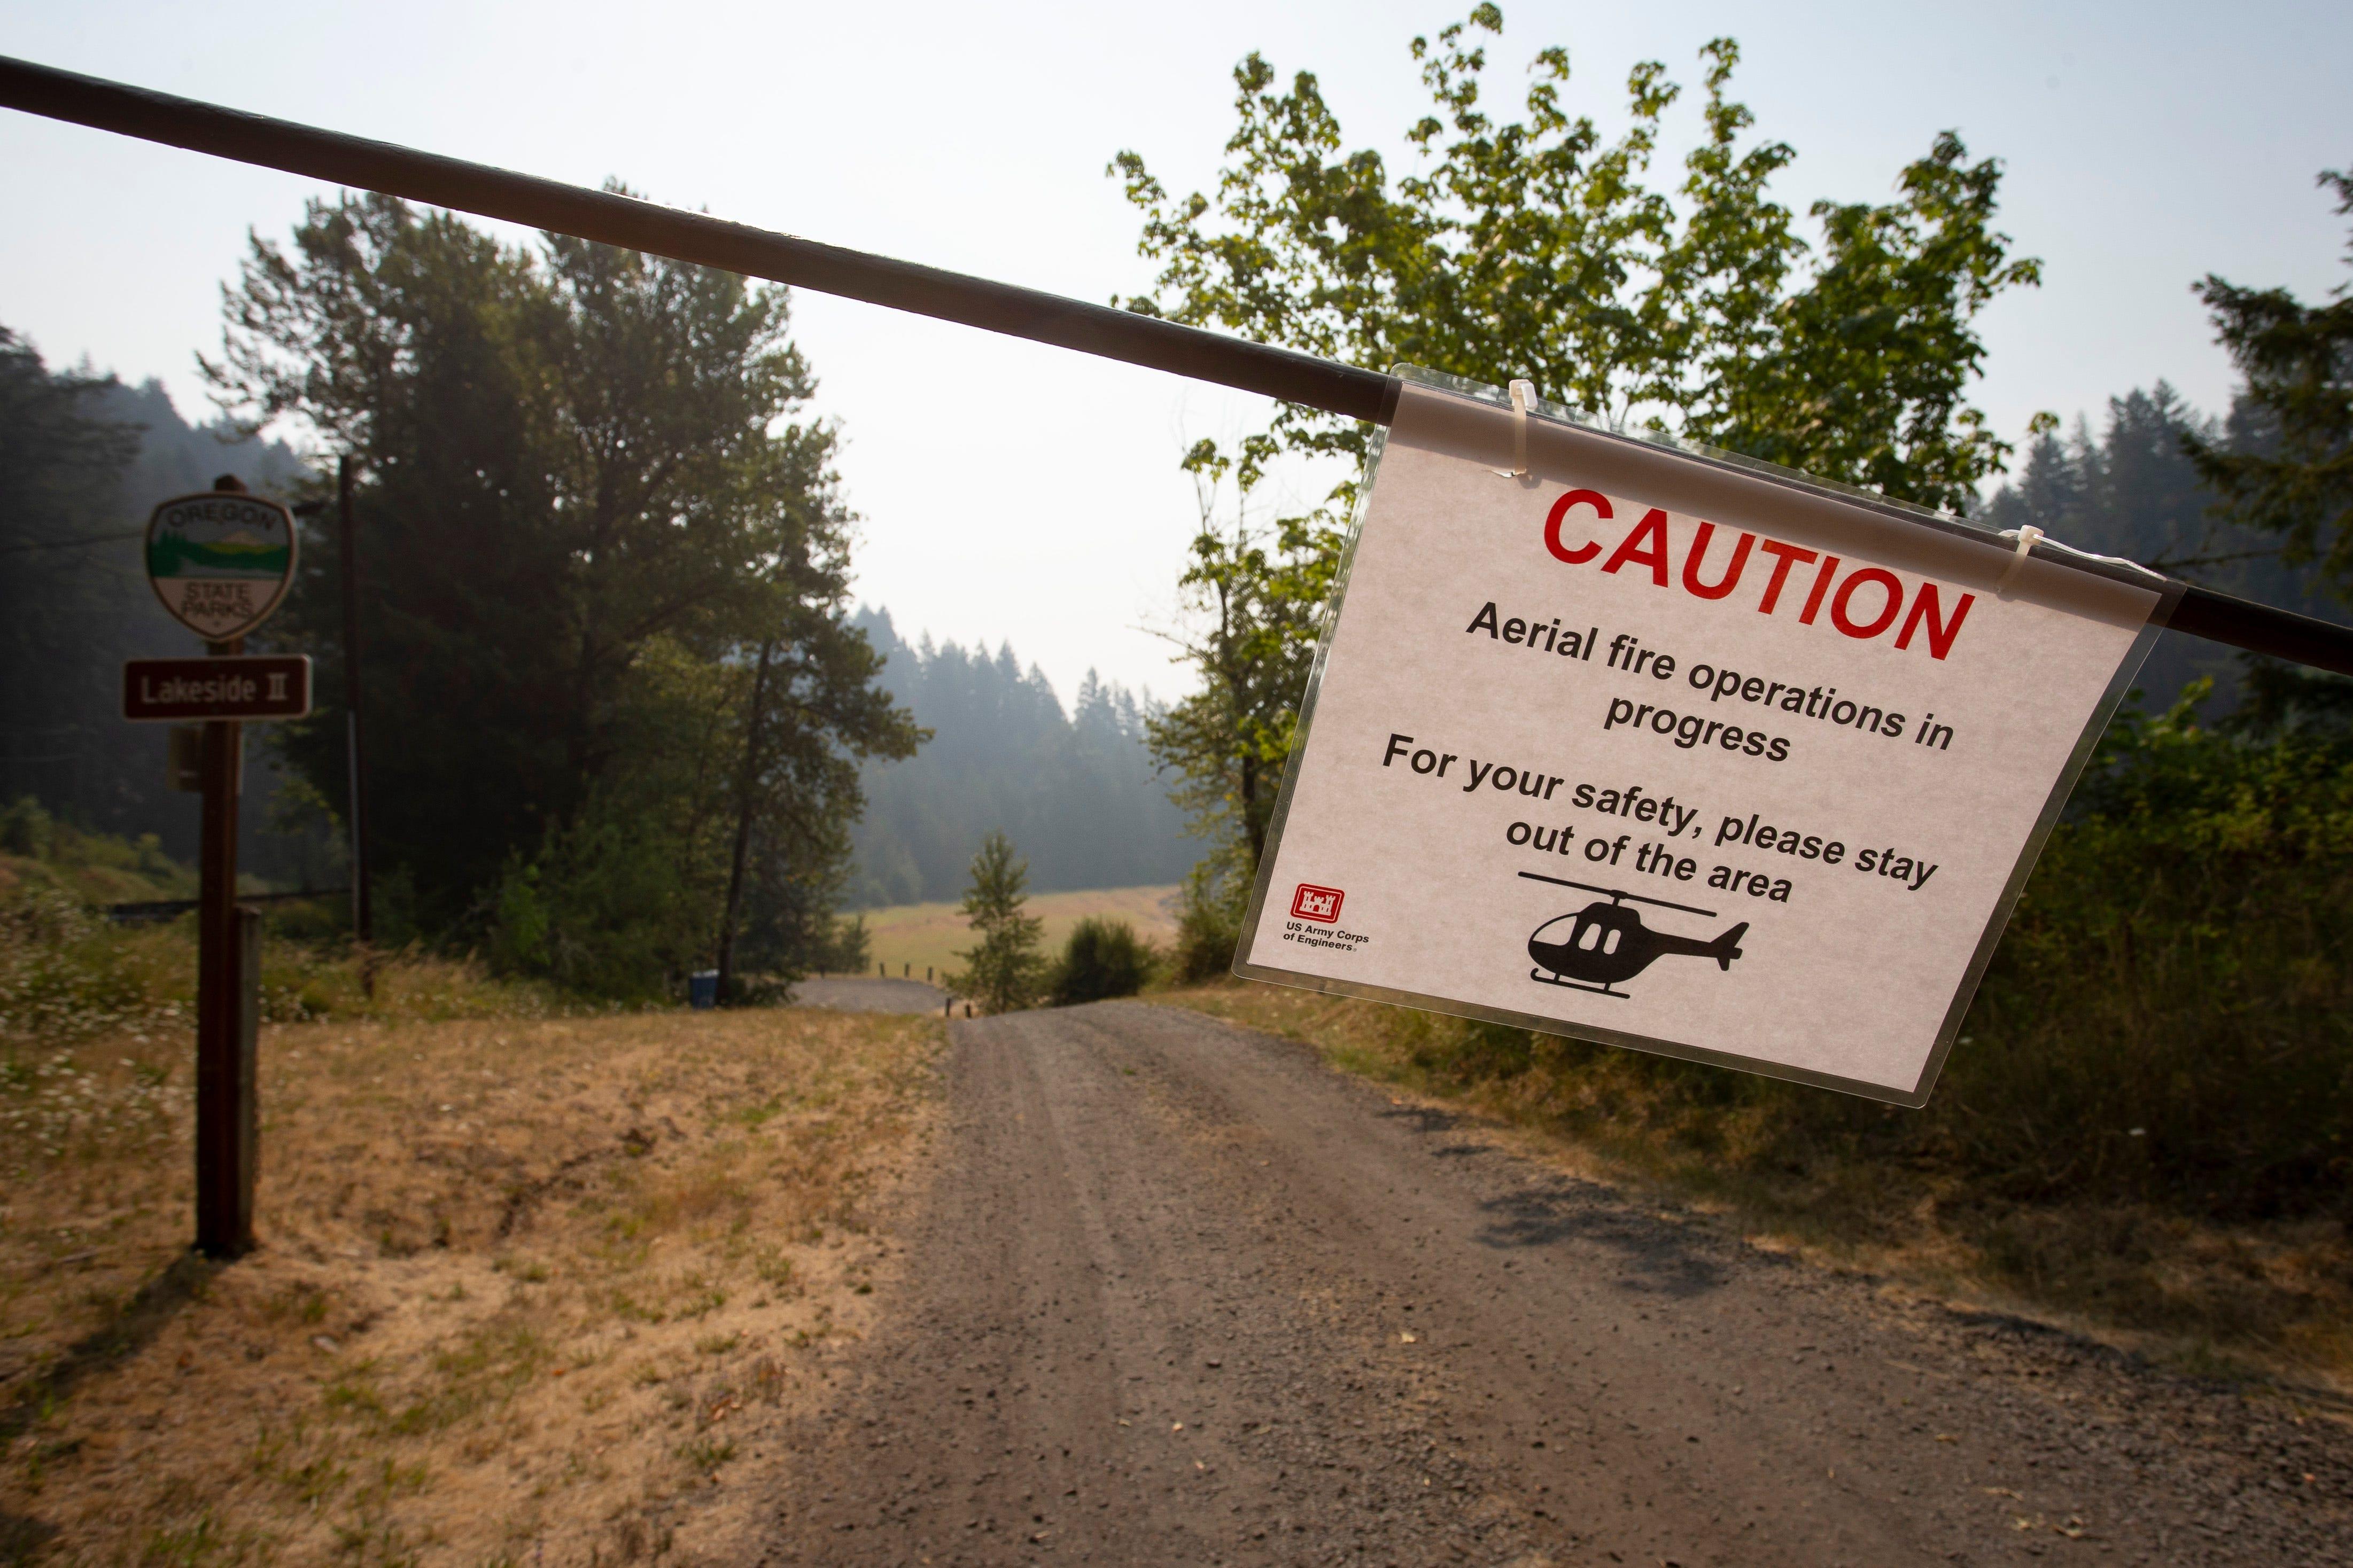 A sign near the east end of Fall Creek Lake warns of closures due to aerial fire operations on Tuesday.